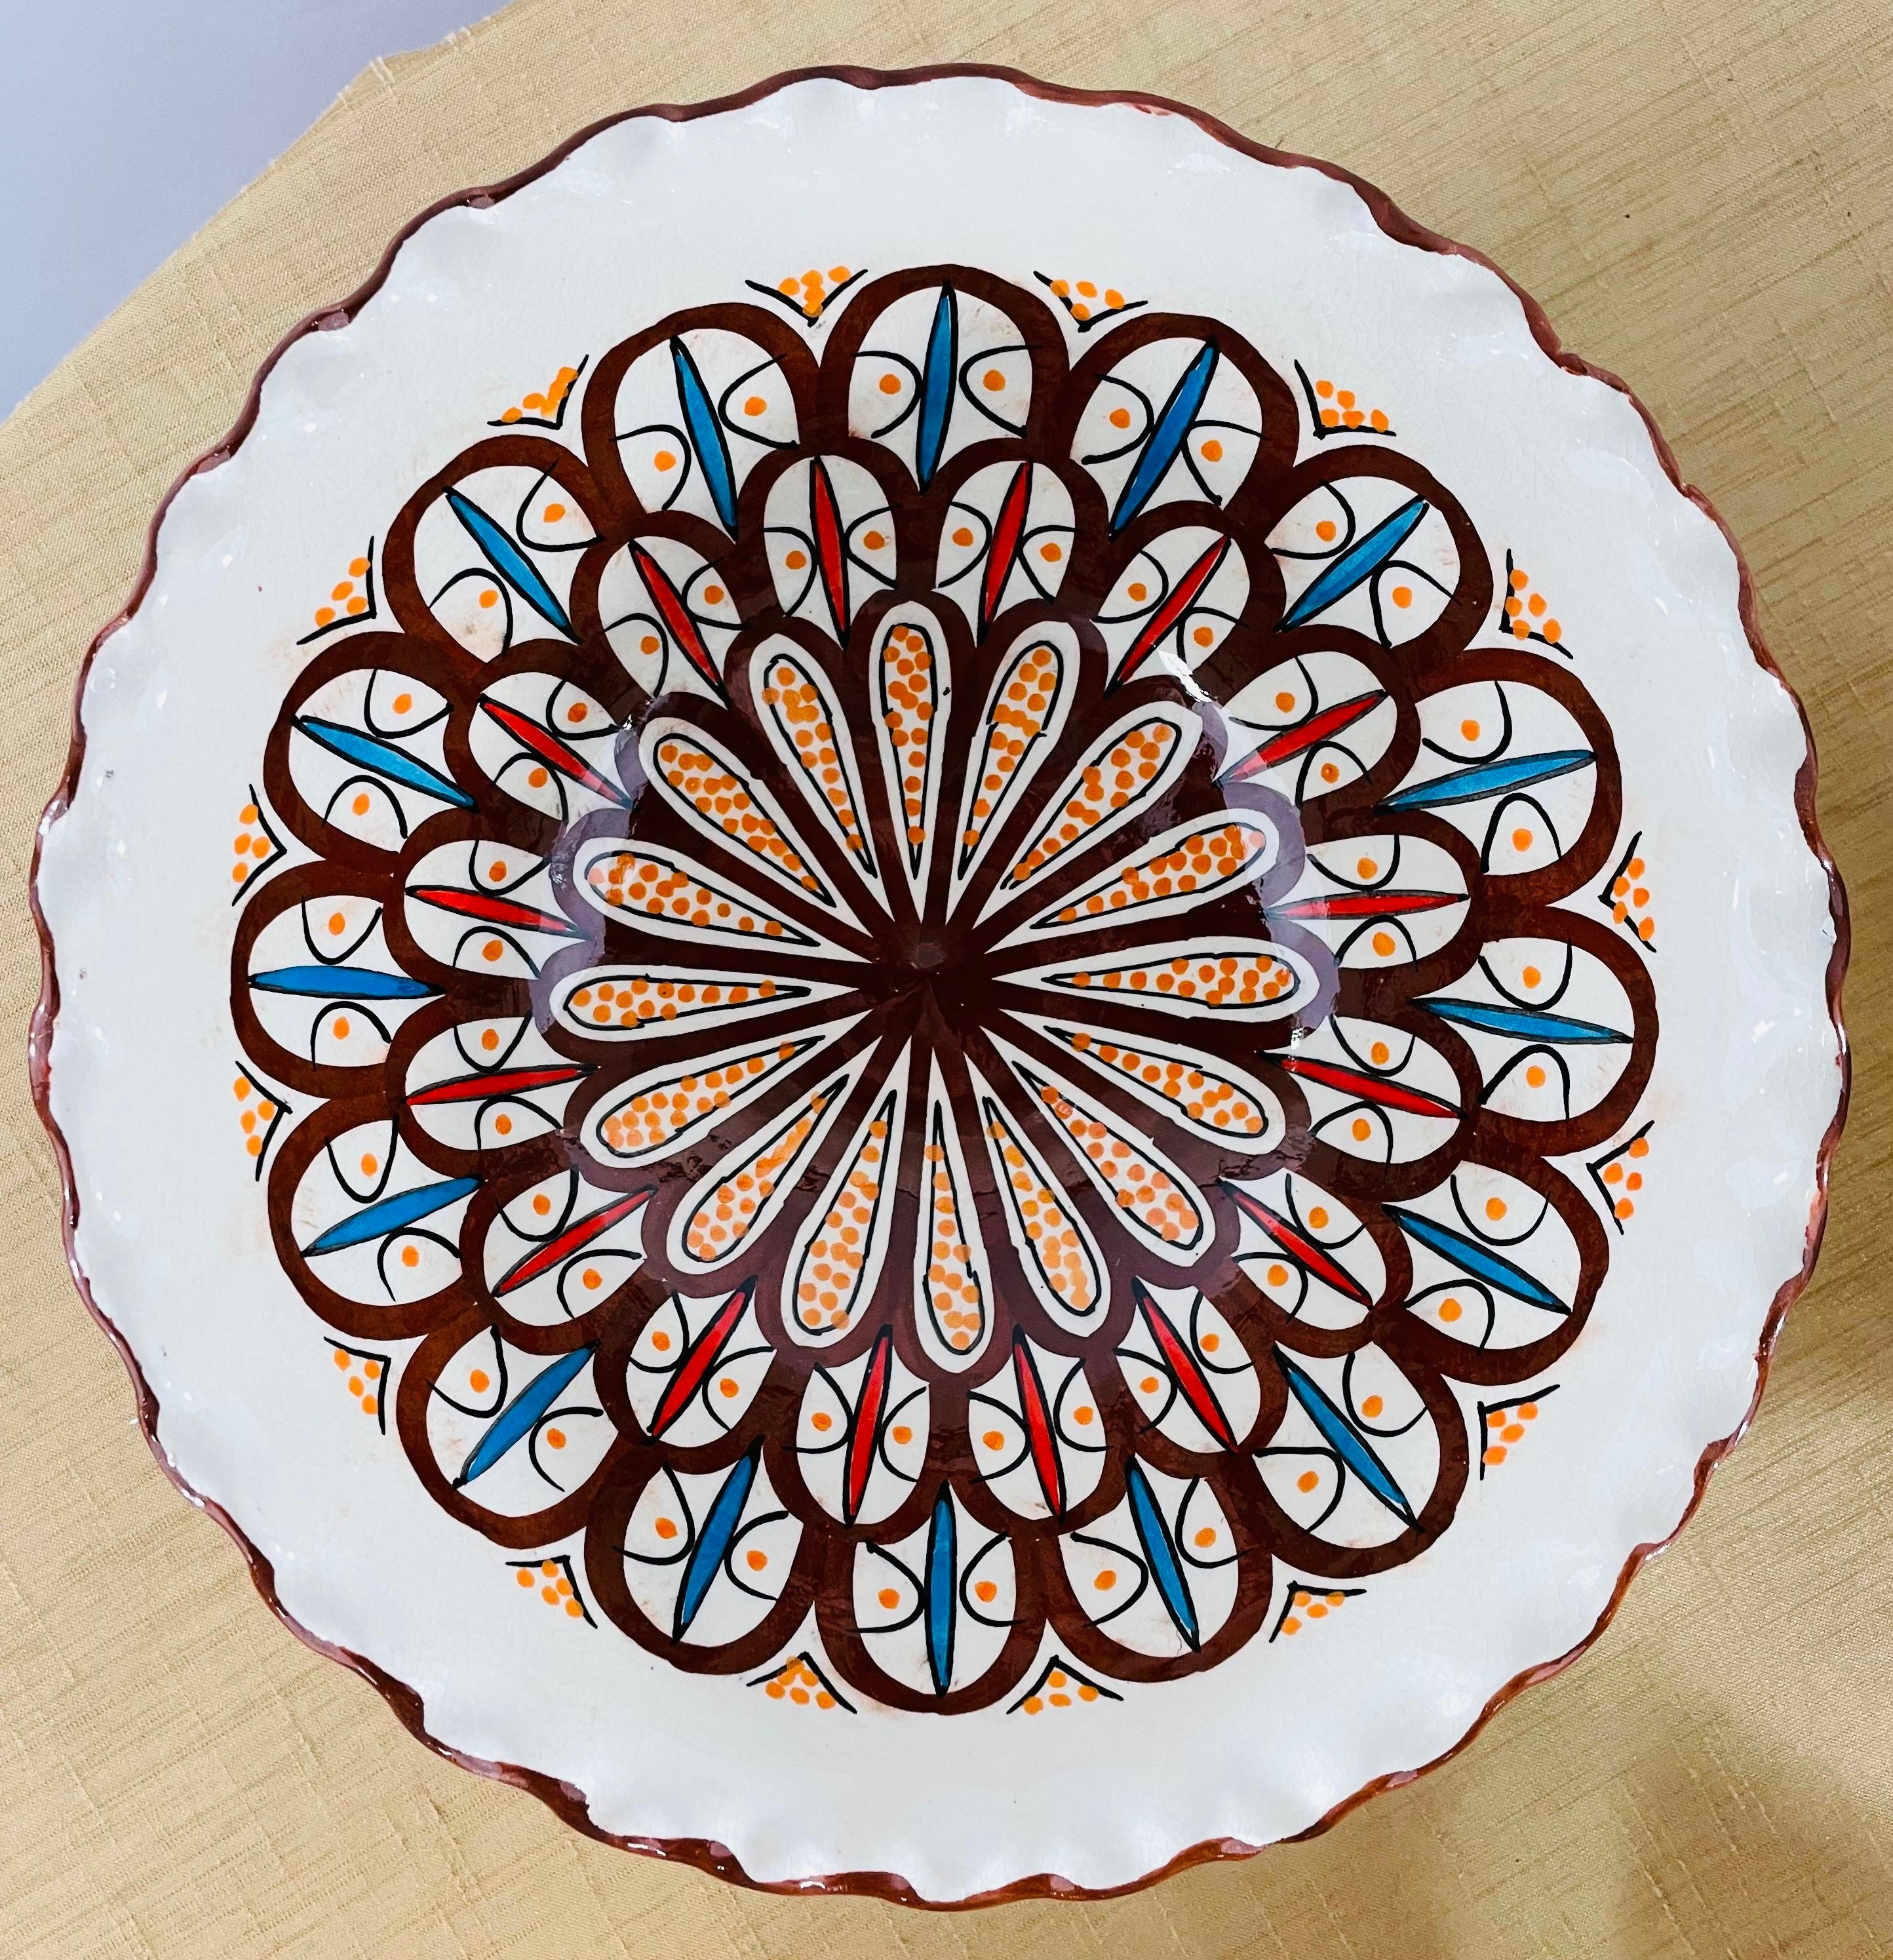 These stunning bowls feature an arabesque pattern and an entrancing fusion of color in white and brown handcrafted in the coastal city of Safi in Moroccan, which is renowned for its high-quality pottery, and ceramic art, they can be wall mounted to